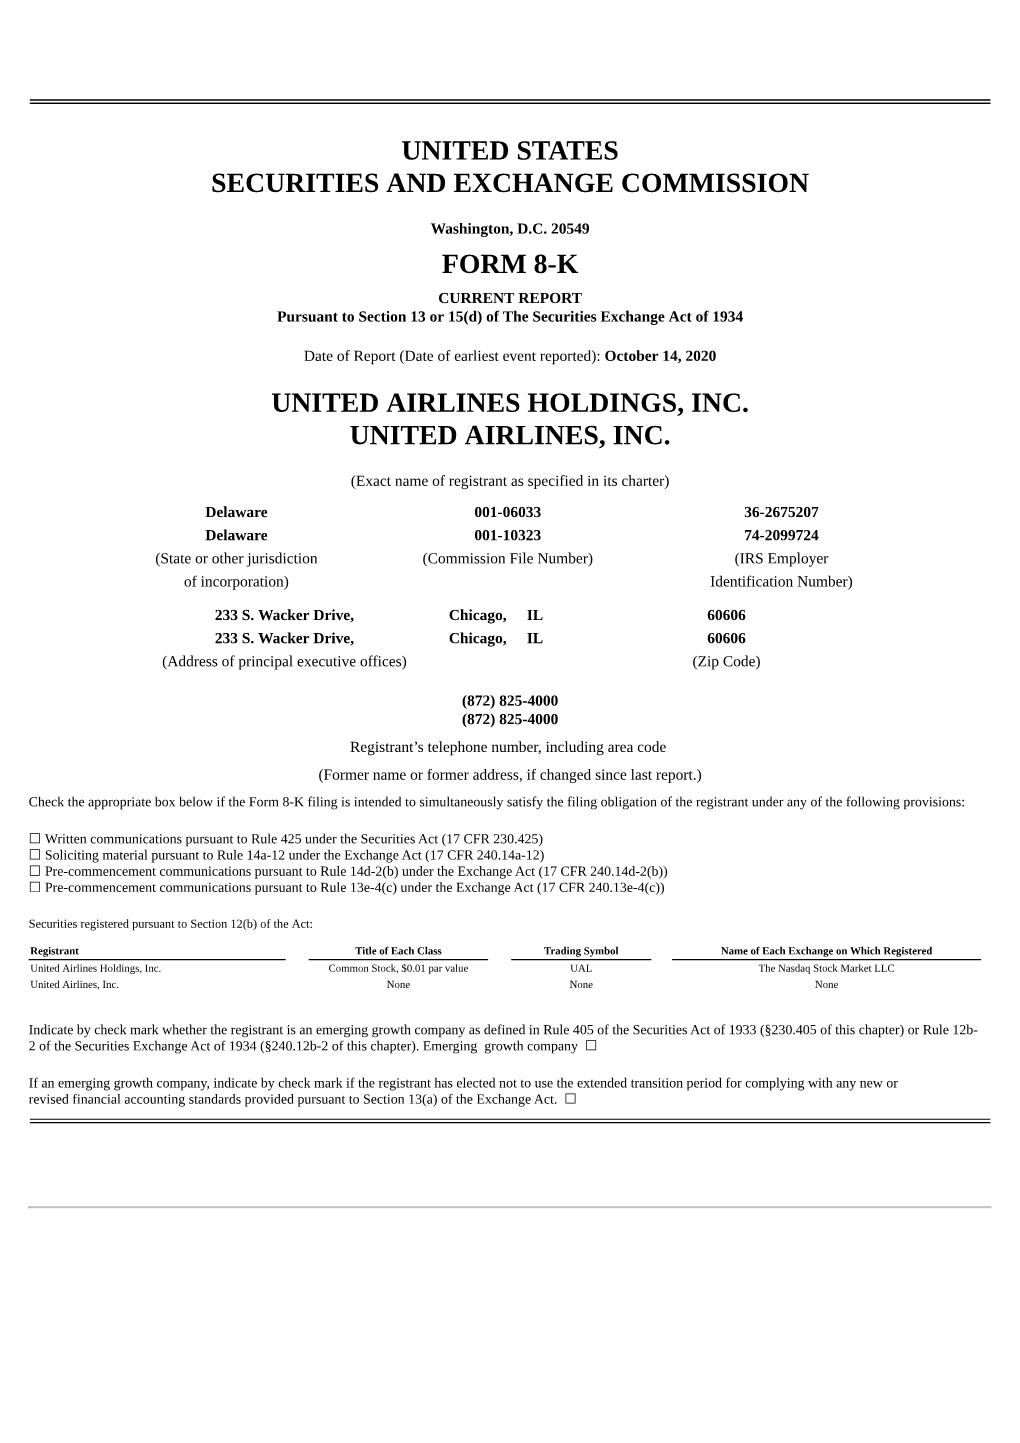 United States Securities and Exchange Commission Form 8-K United Airlines Holdings, Inc. United Airlines, Inc